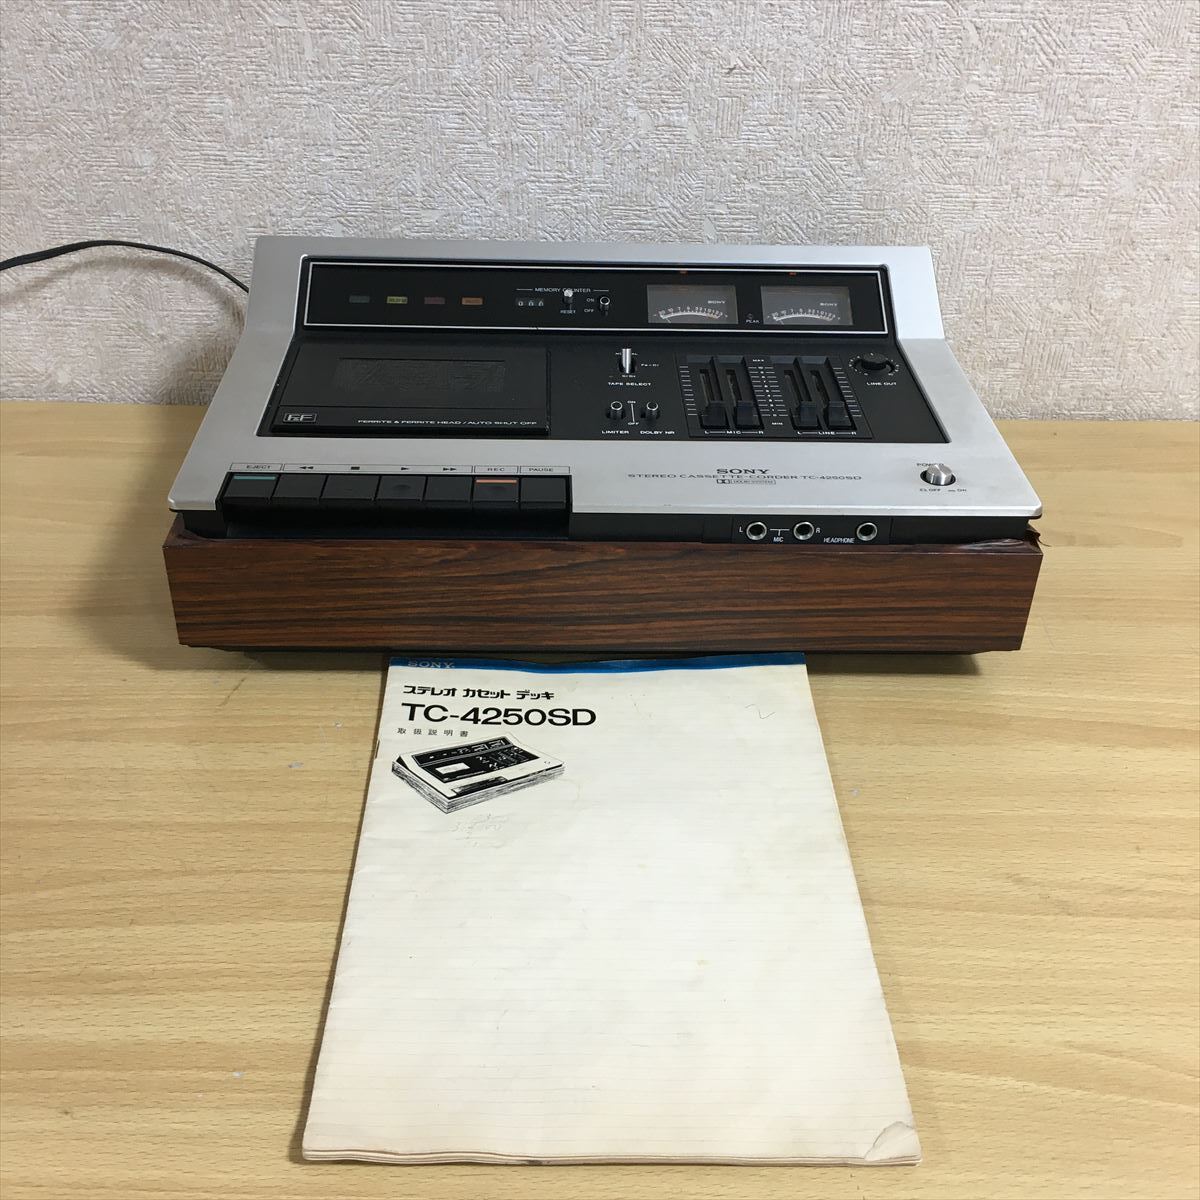 SONY Sony TC-4250SD stereo cassette deck DOLBY SYSTEM Showa Retro audio equipment manual attaching 3s5397